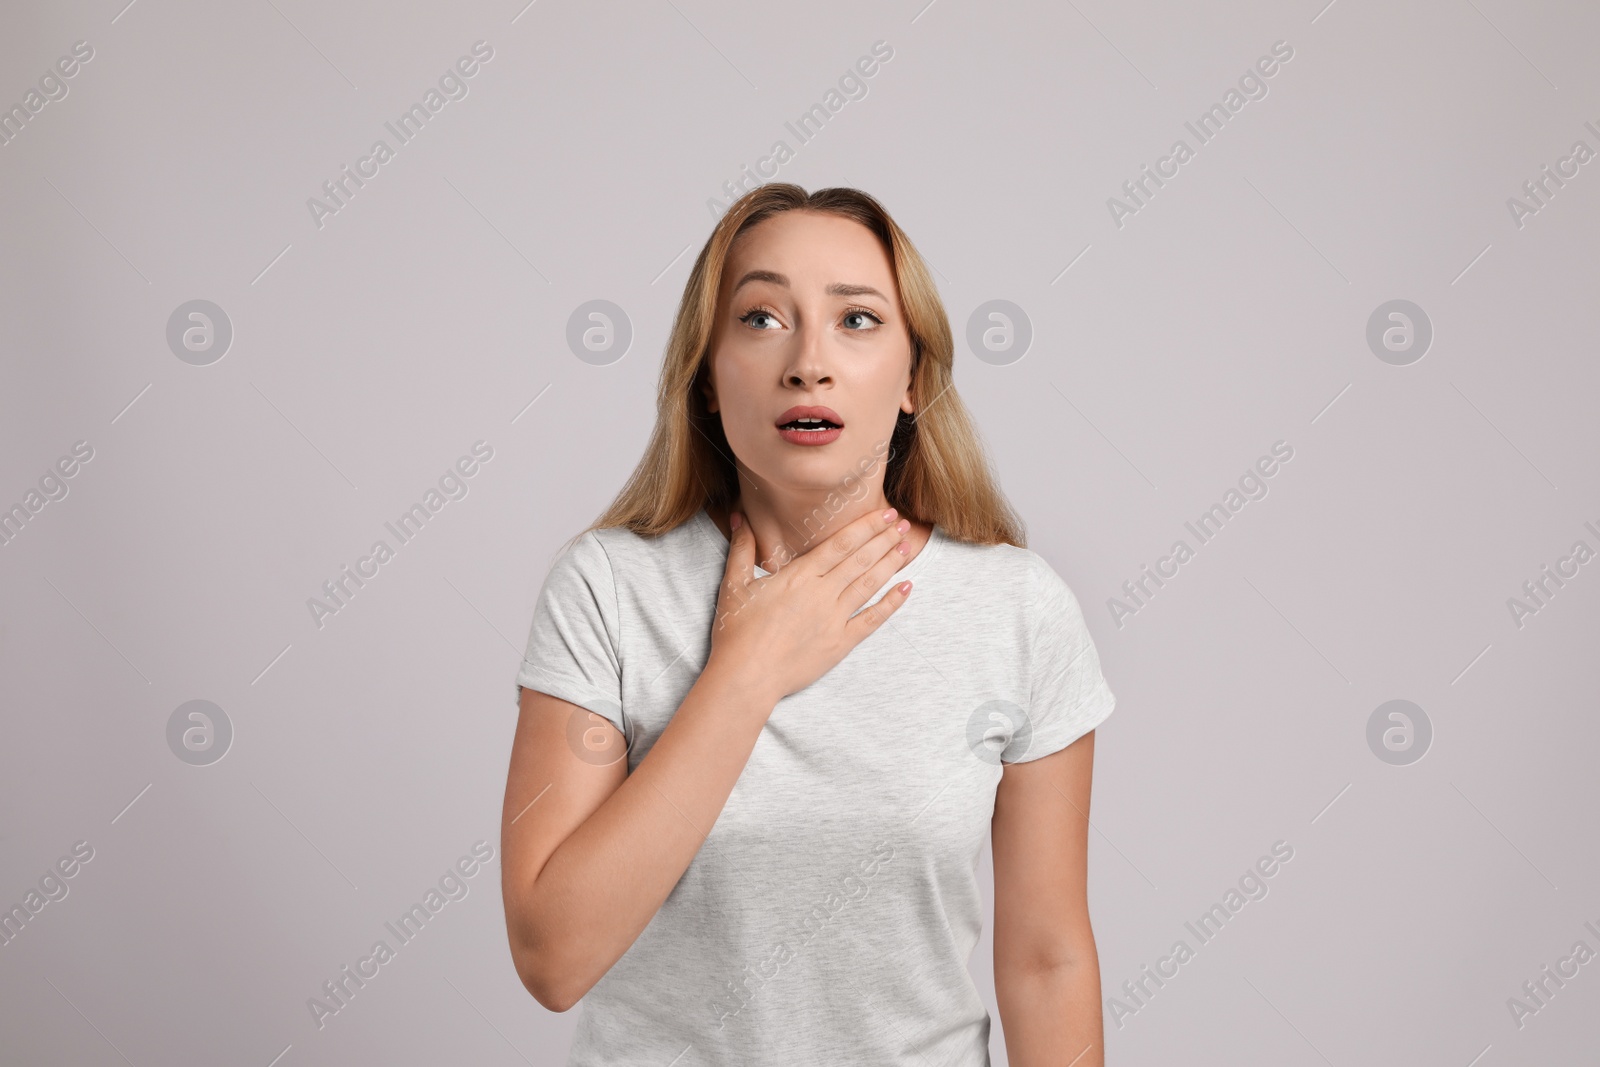 Photo of Young woman suffering from pain during breathing on light grey background